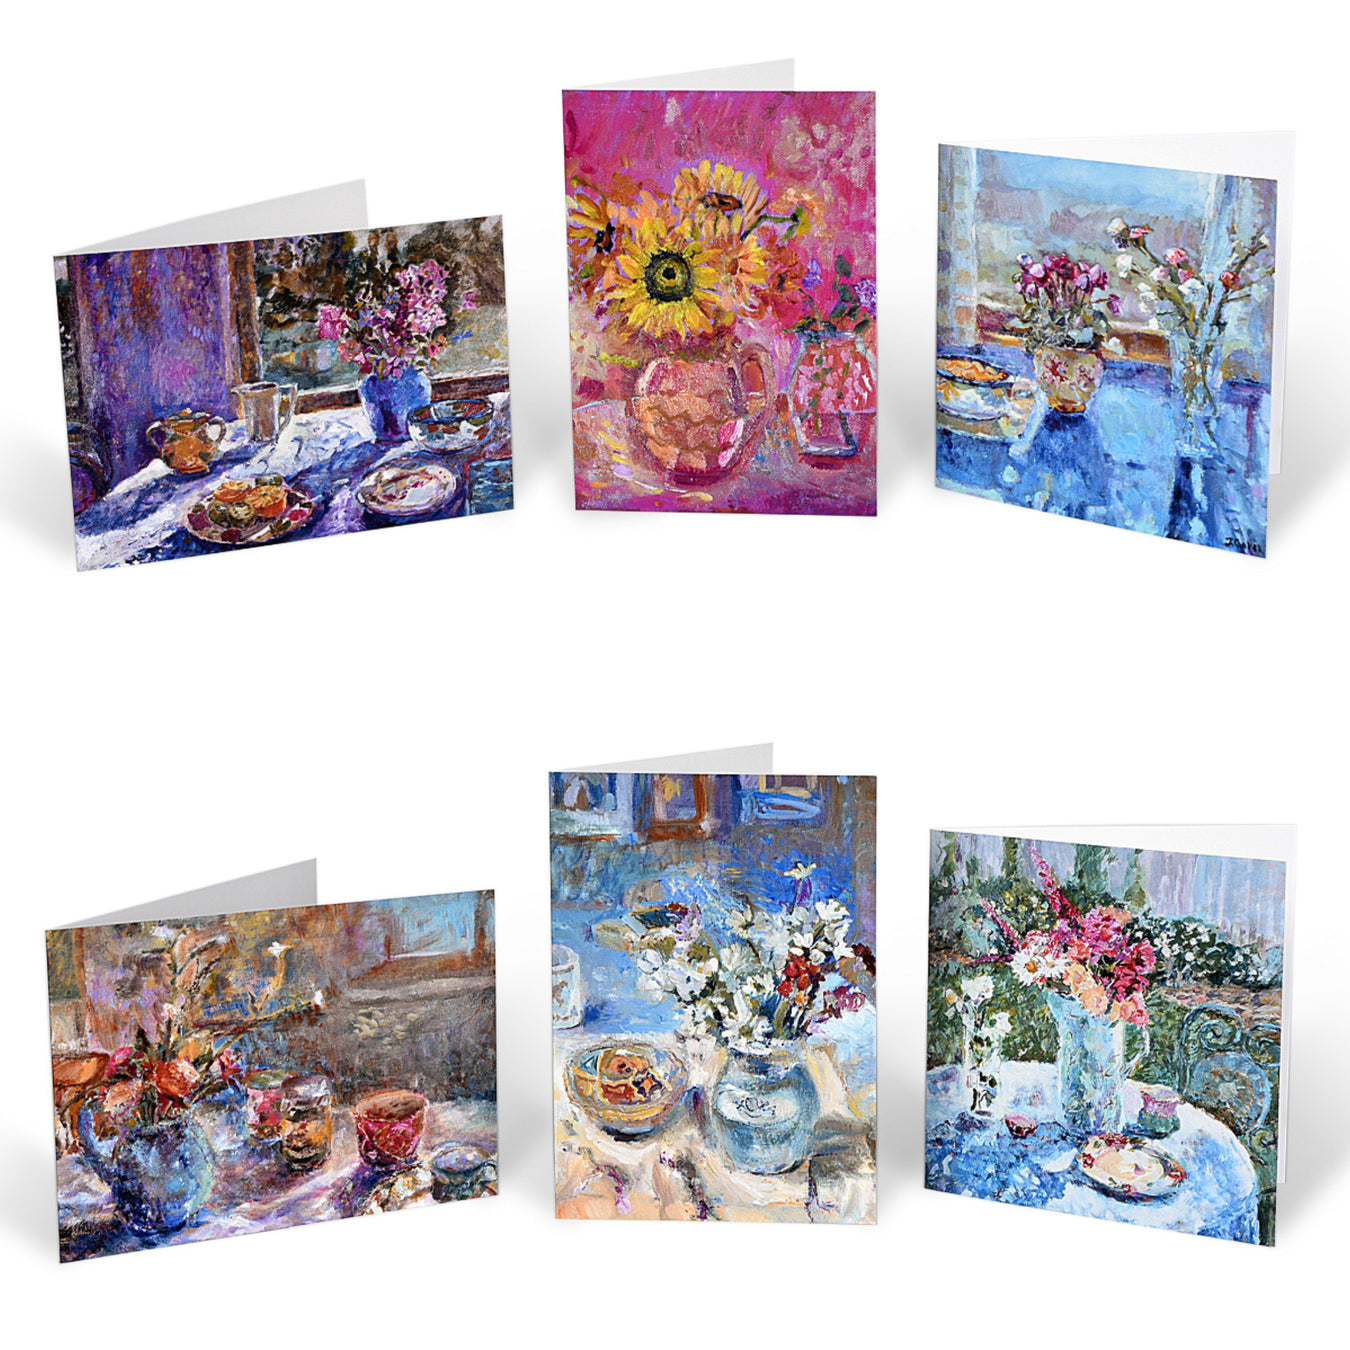 Still Life Greeting Cards. A range of fine art greeting cards made from original art. All artwork is by Judi Glover Art